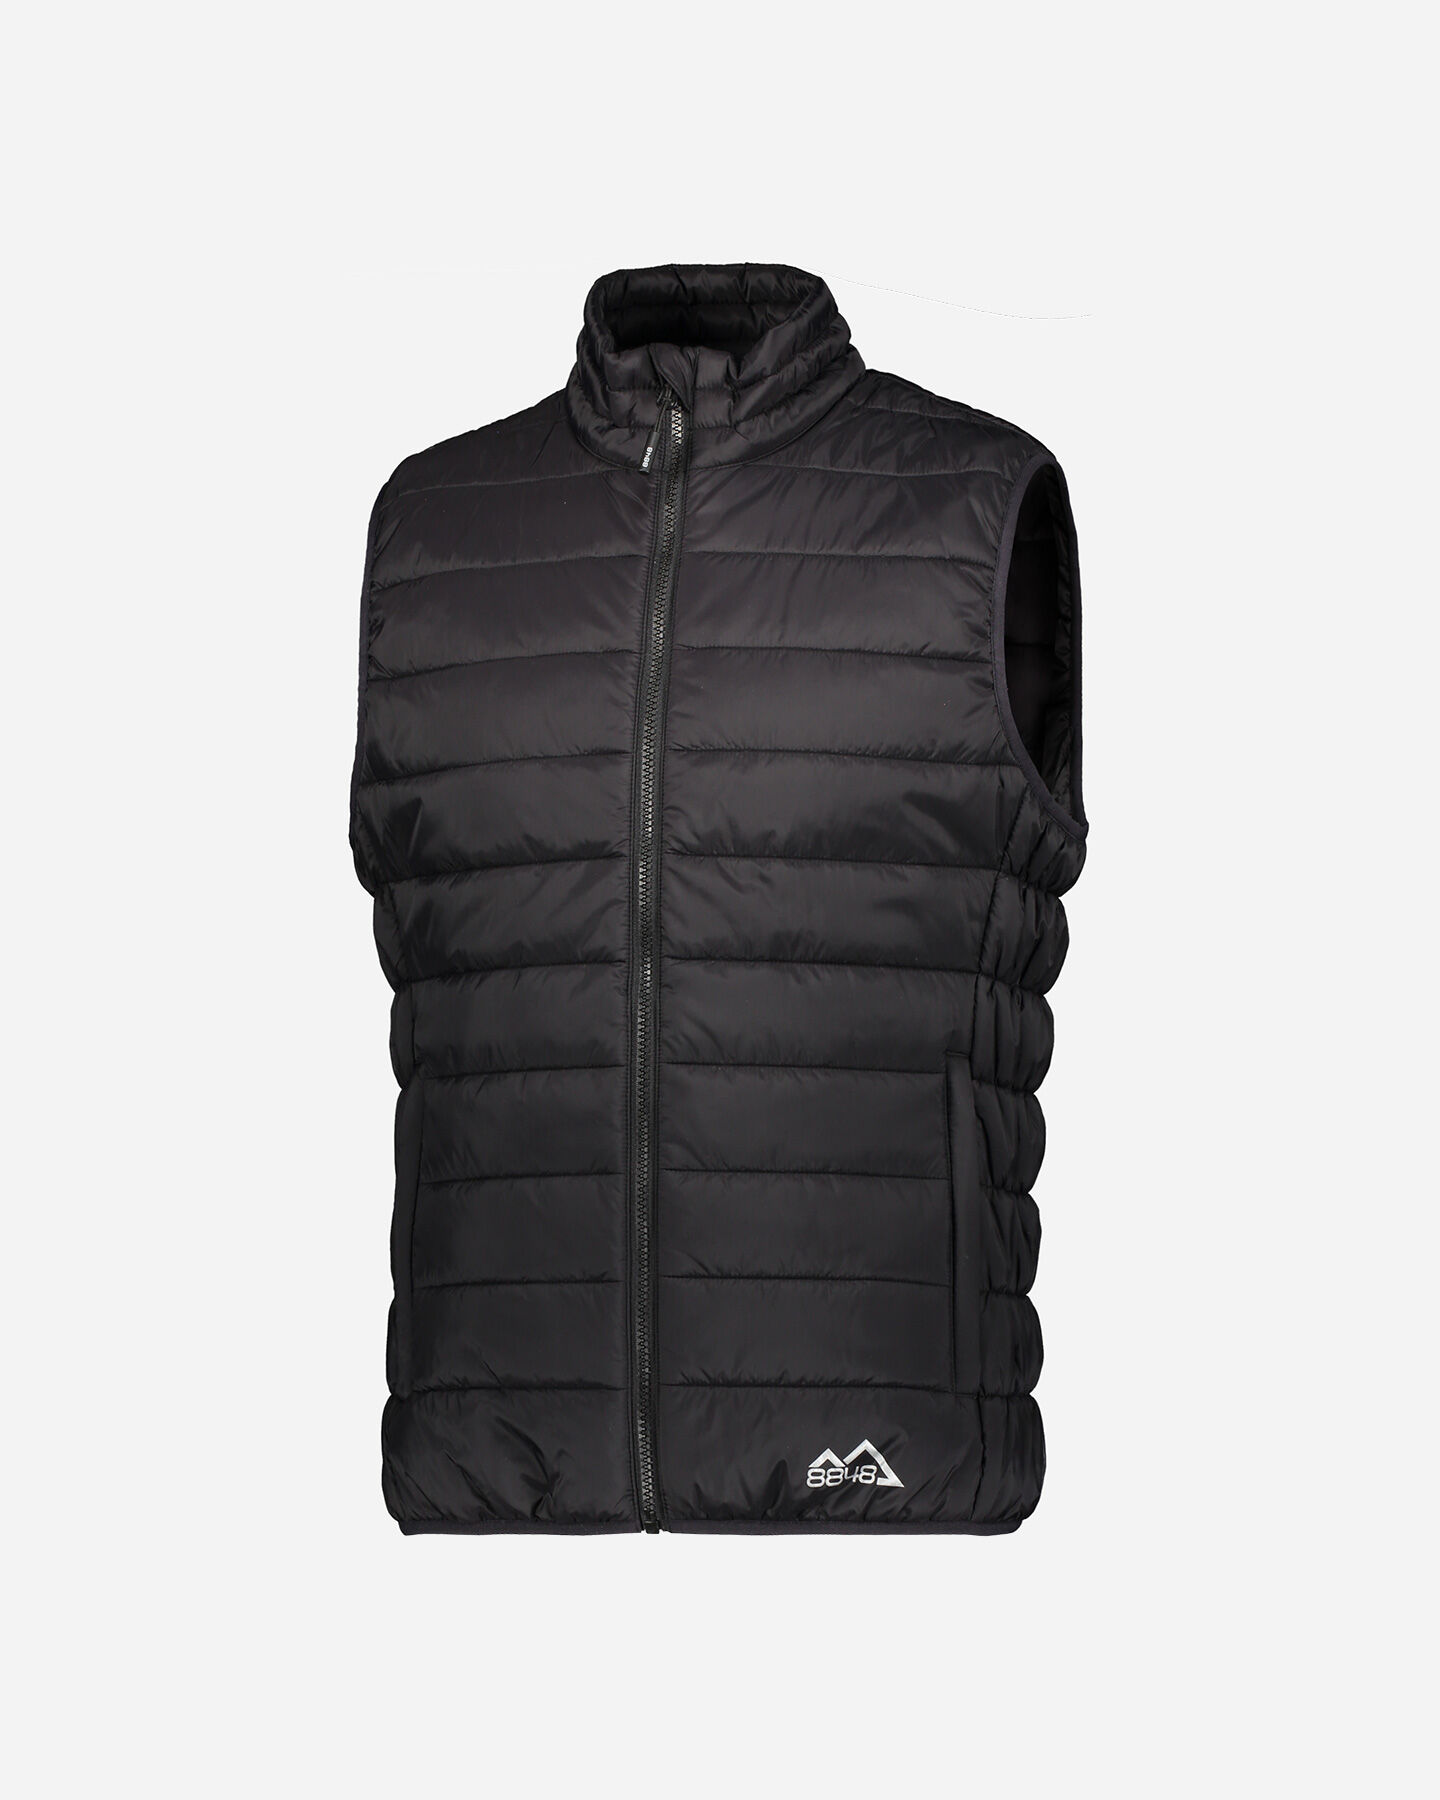  Gilet 8848 BASIC M S4069143|050|XS scatto 0